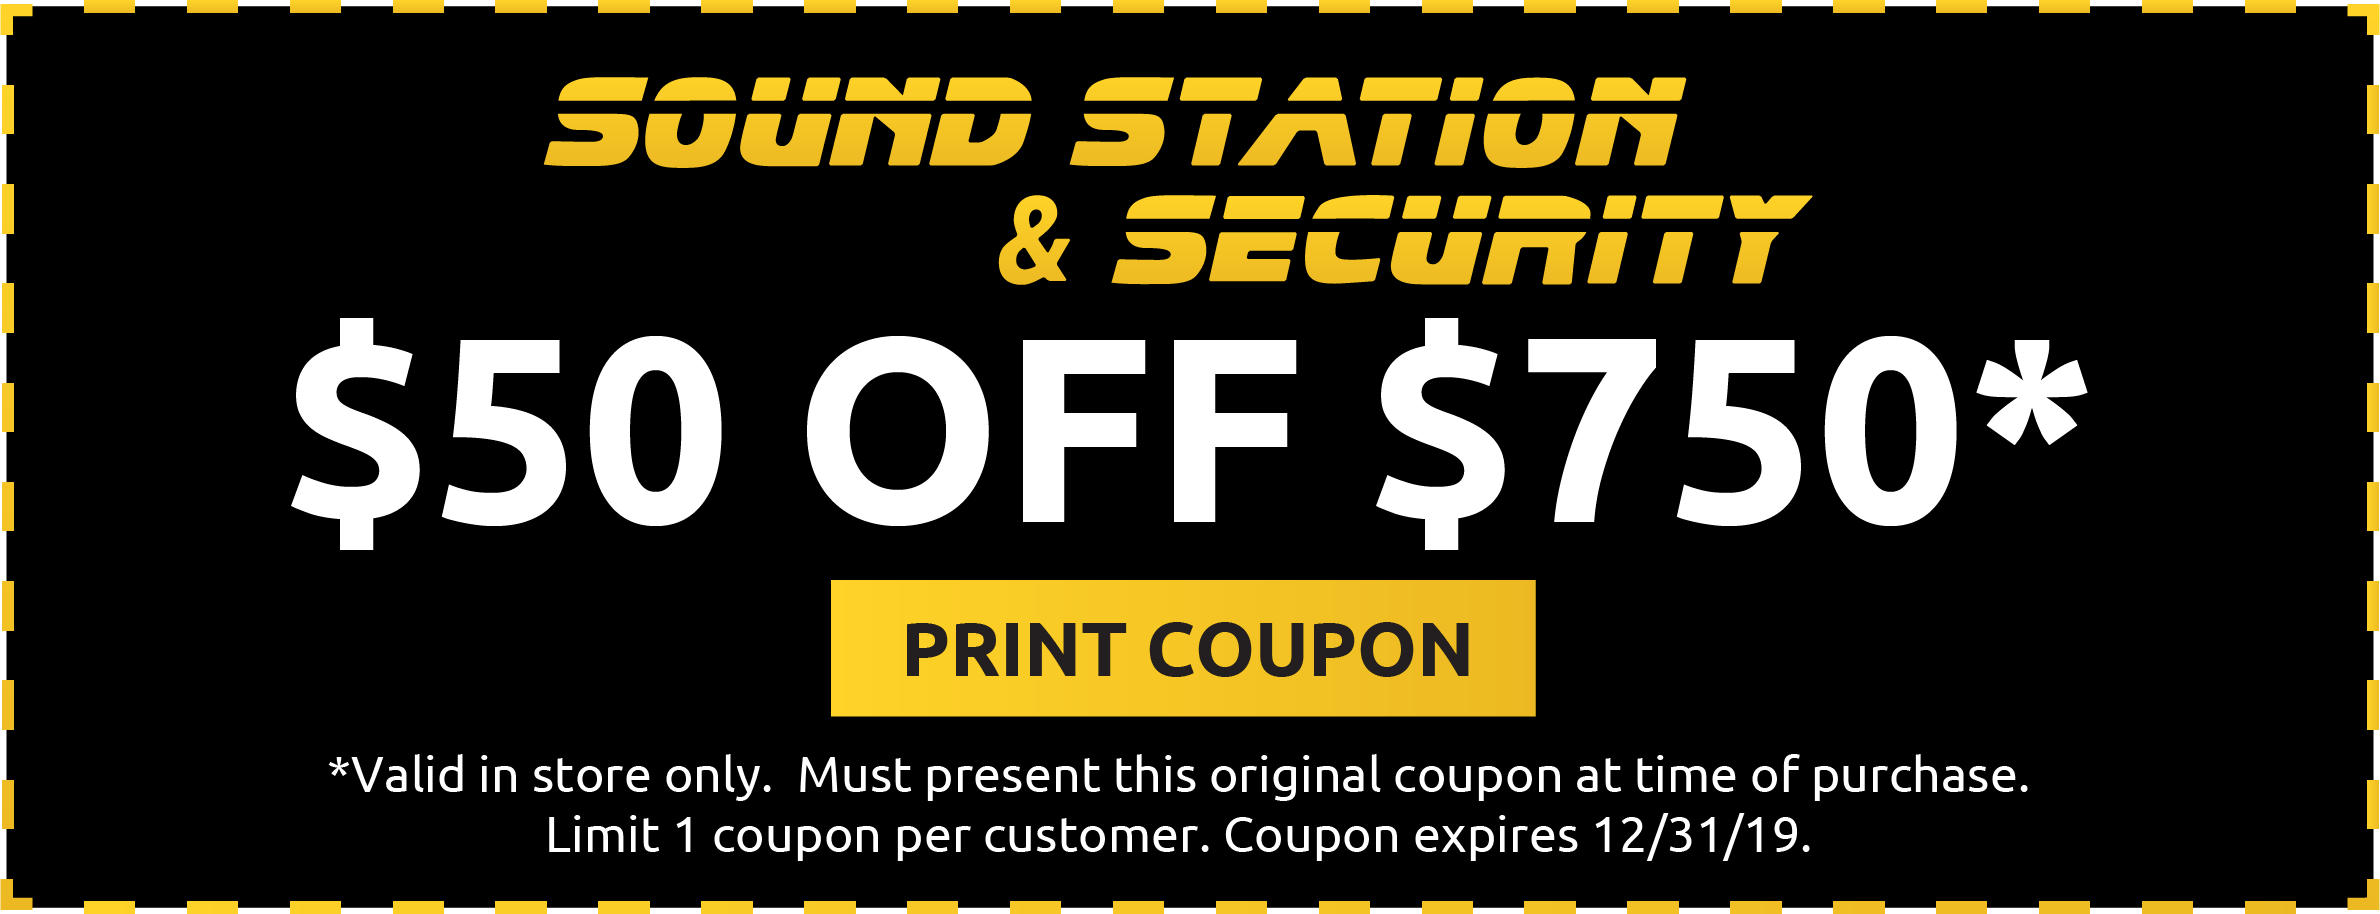 Sound Station & Security Coupon